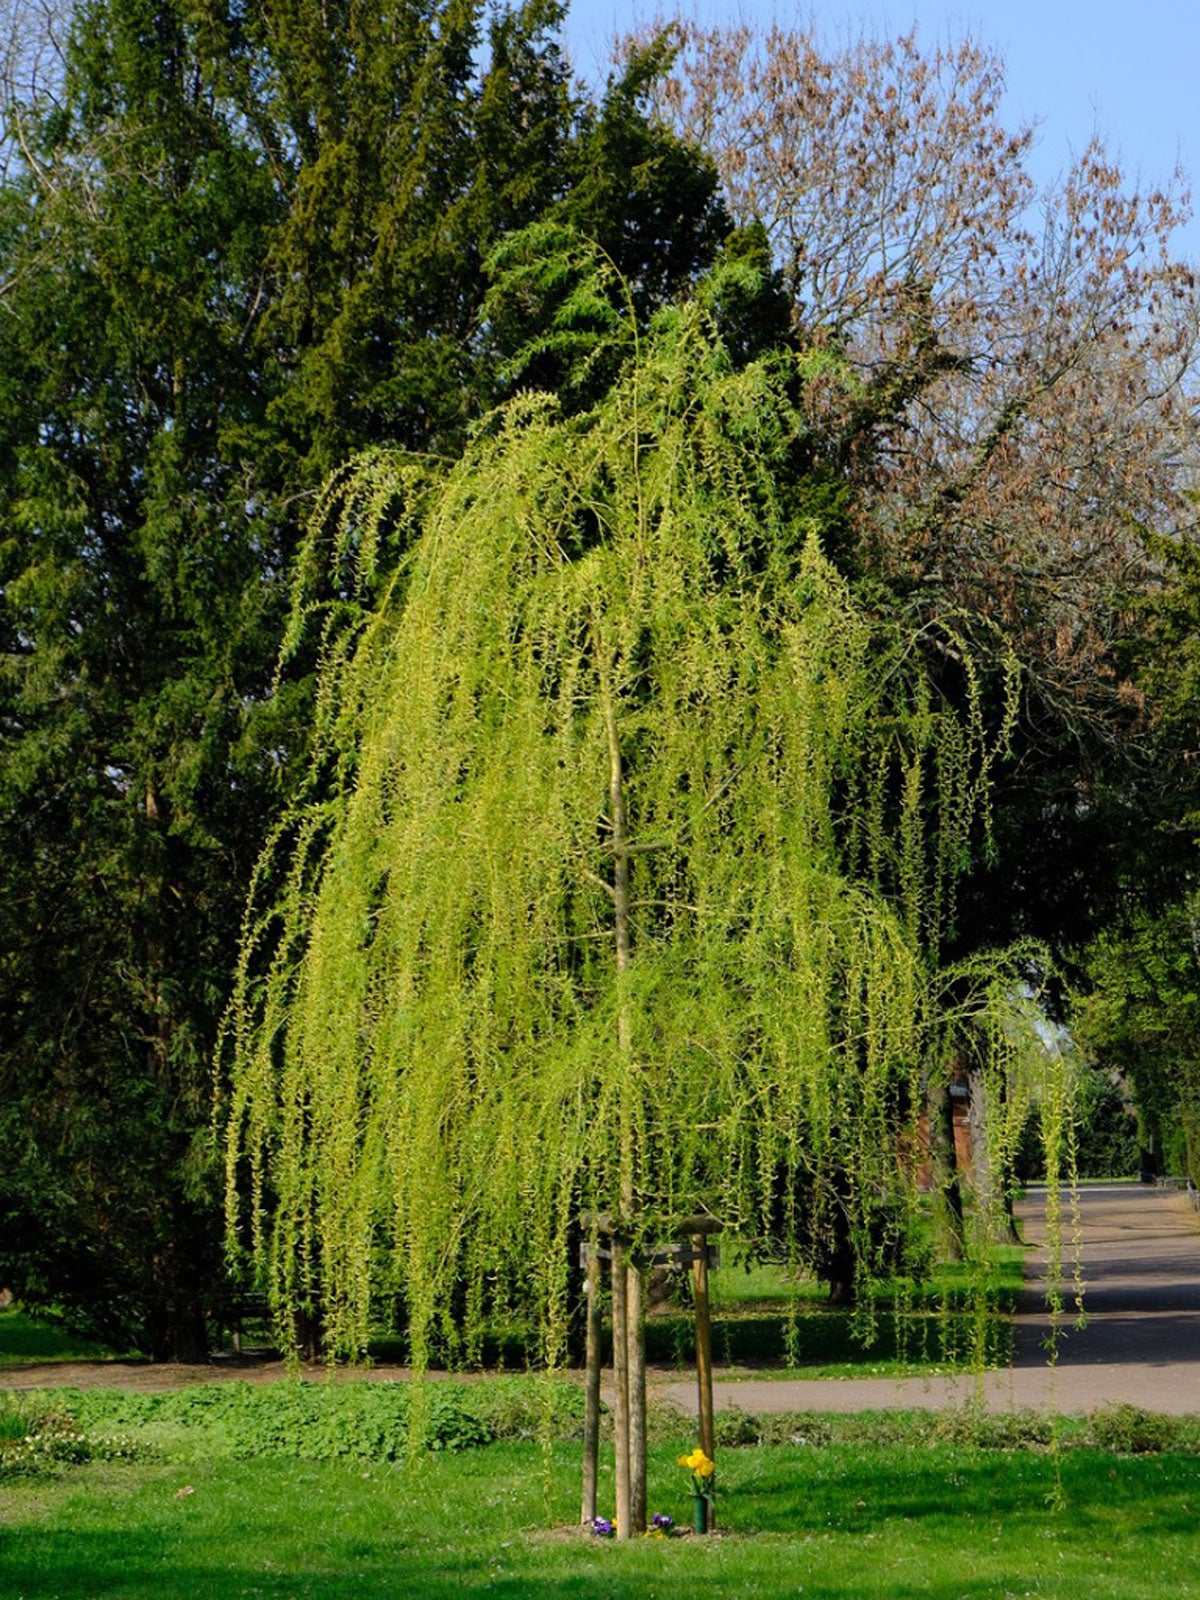 Native Plant Alternatives to Salix babylonica (Weeping Willow)